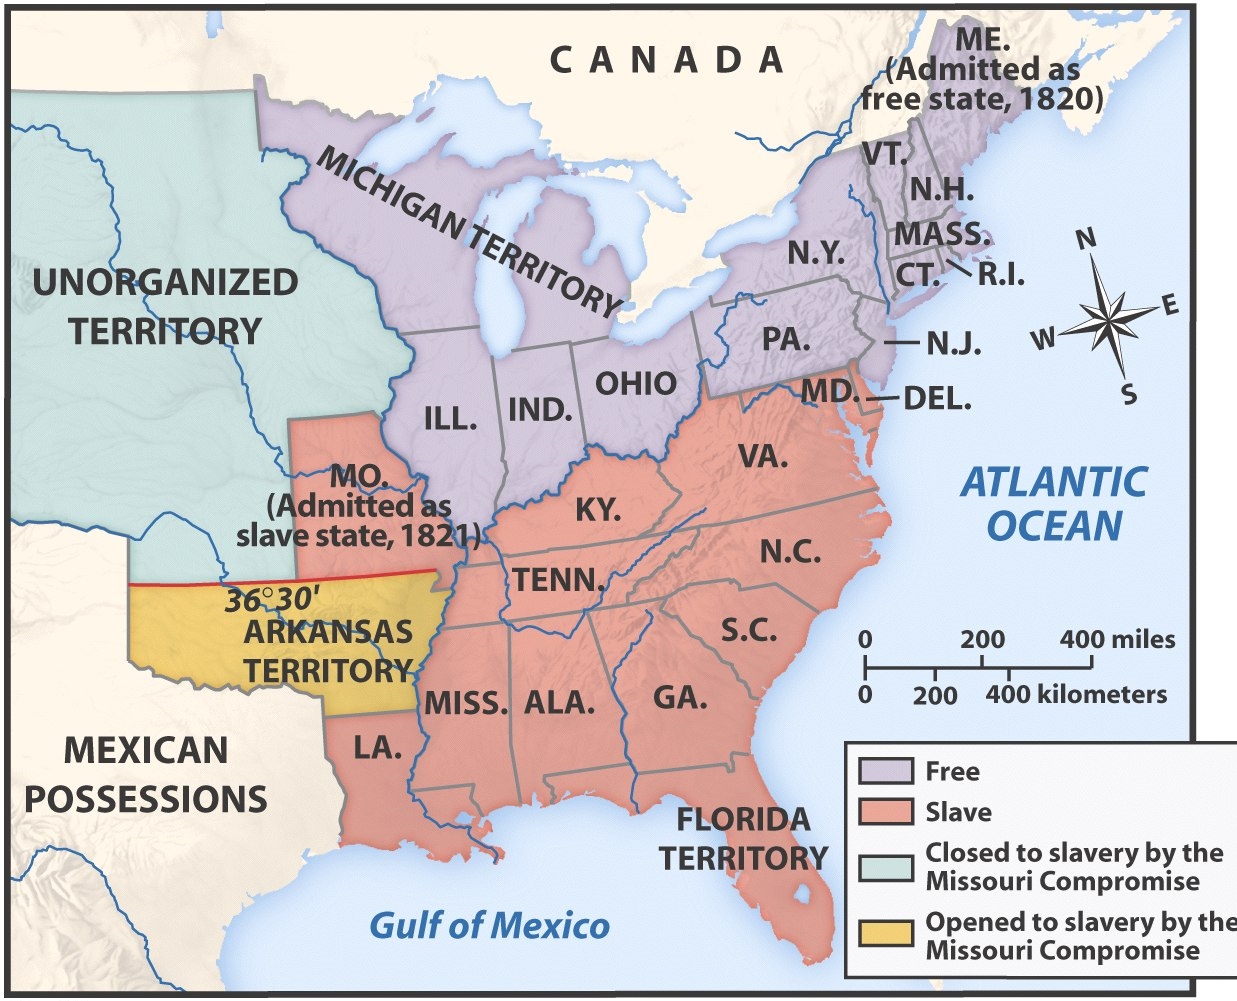 The Missouri Compromise is the title generally attached to the legislation passed by the 16th United States Congress on May 9, 1820. The measures provided for the admission of Maine as a free state along with Missouri as a slave state, thus maintaining the balance of power between North and South. As part of the compromise, slavery was prohibited north of the 36°30′ parallel, excluding Missouri. President James Monroe signed the legislation on March 6, 1820.